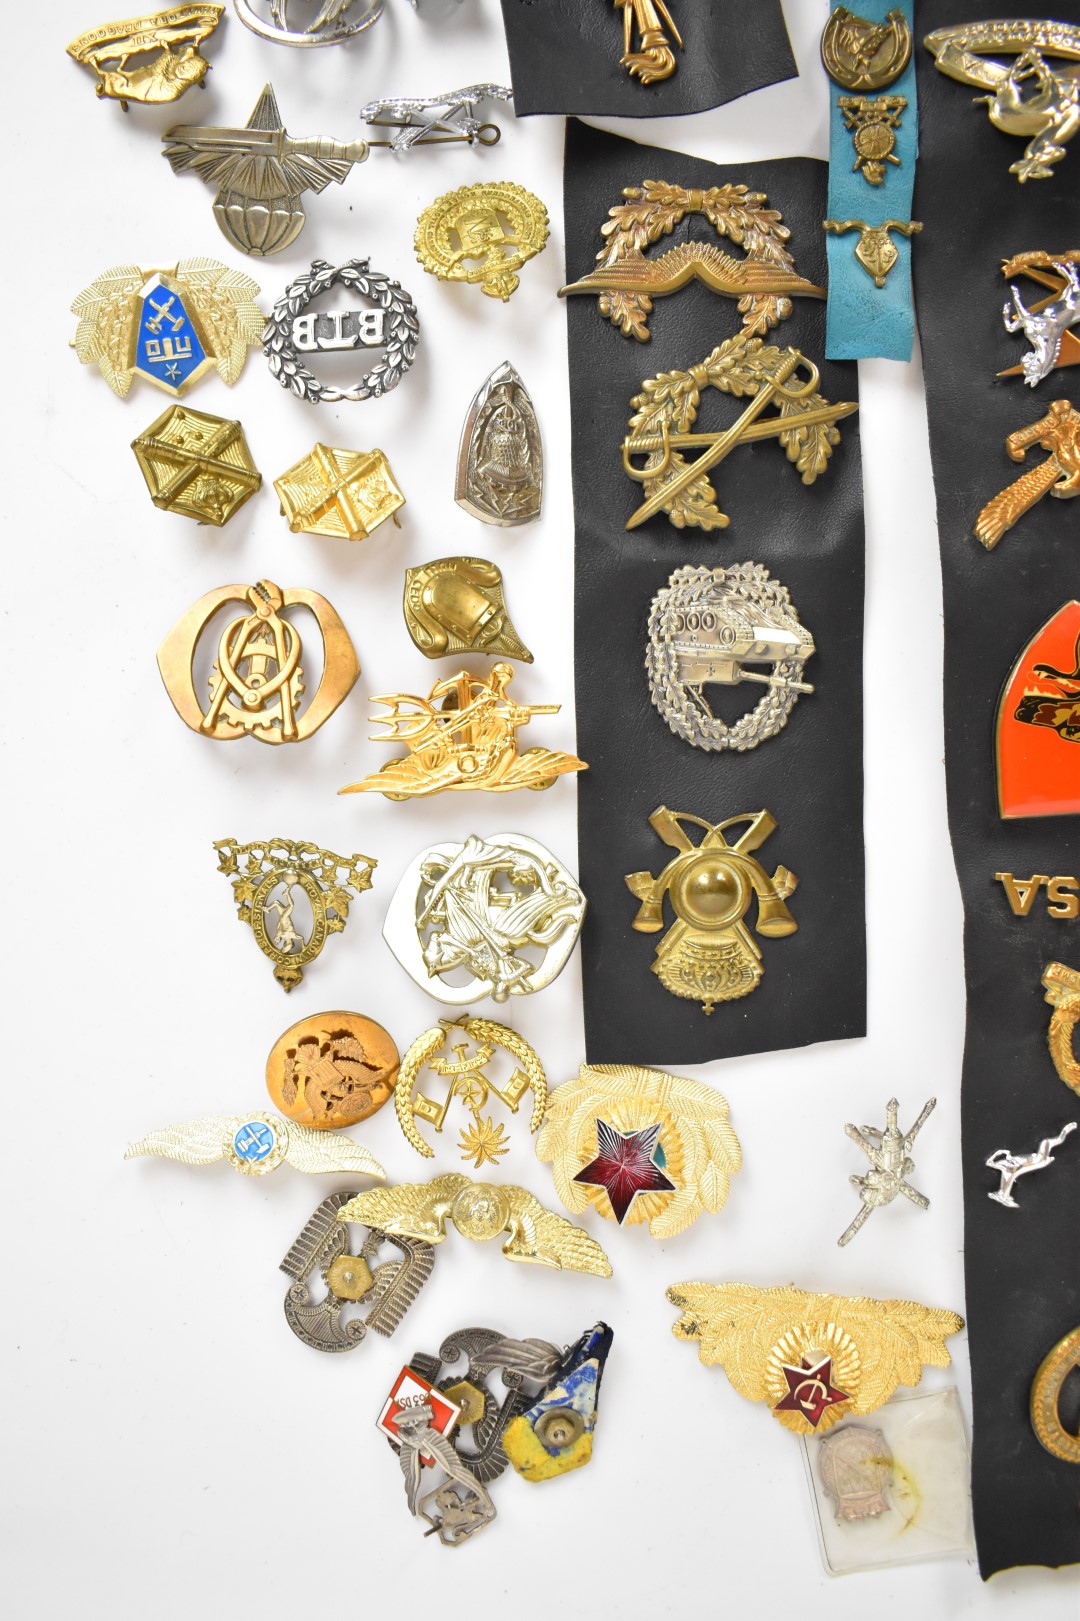 Large collection of approximately 100 overseas forces badges including South Africa, France, Canada, - Image 11 of 16